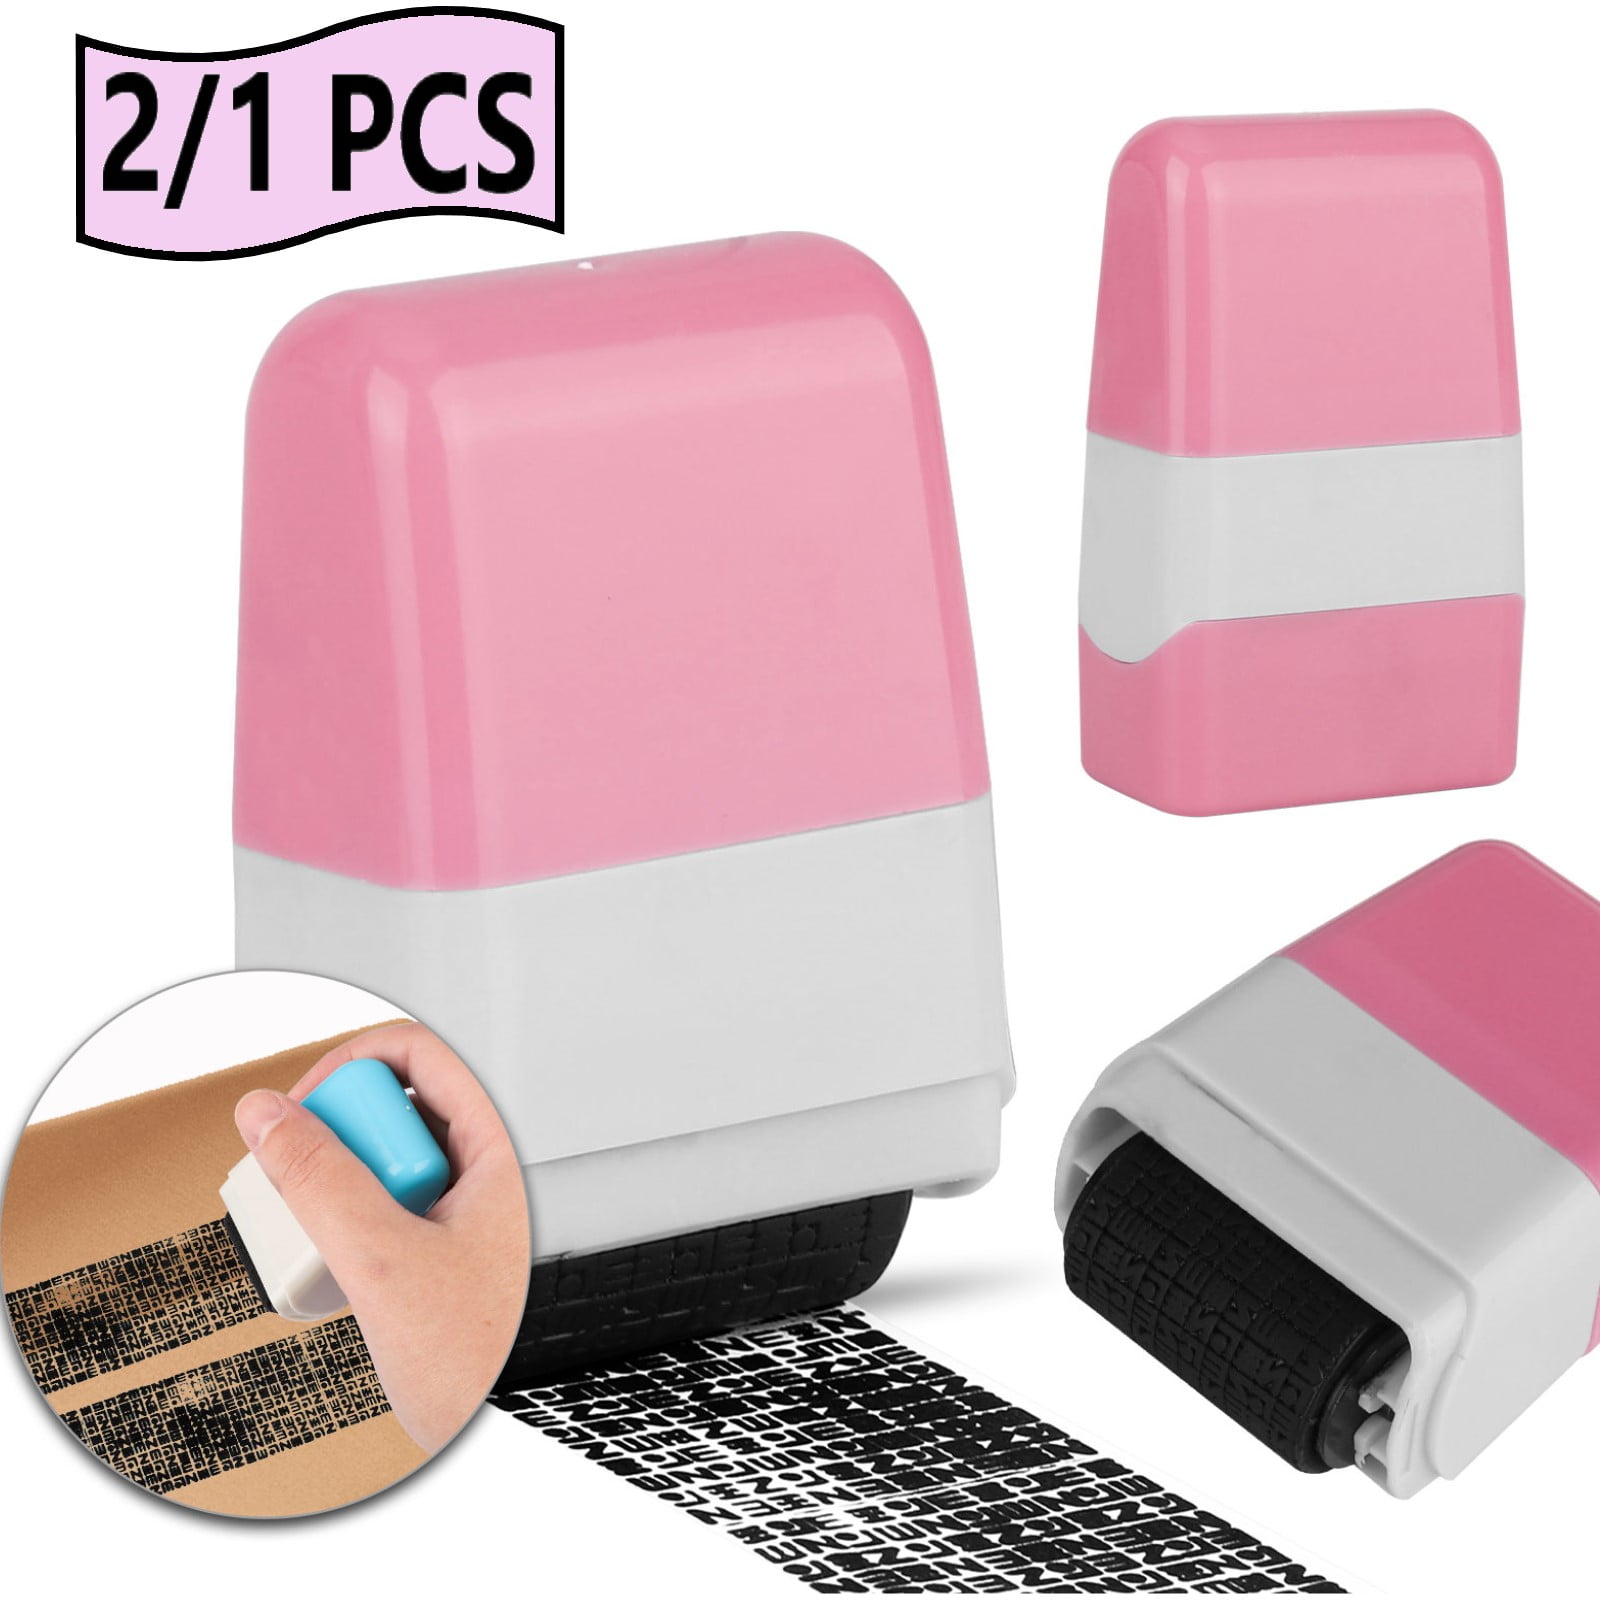 BOWINR 2 Pcs Identity Theft Prevention Security Stamp Wide Roller Security Stamp Kits